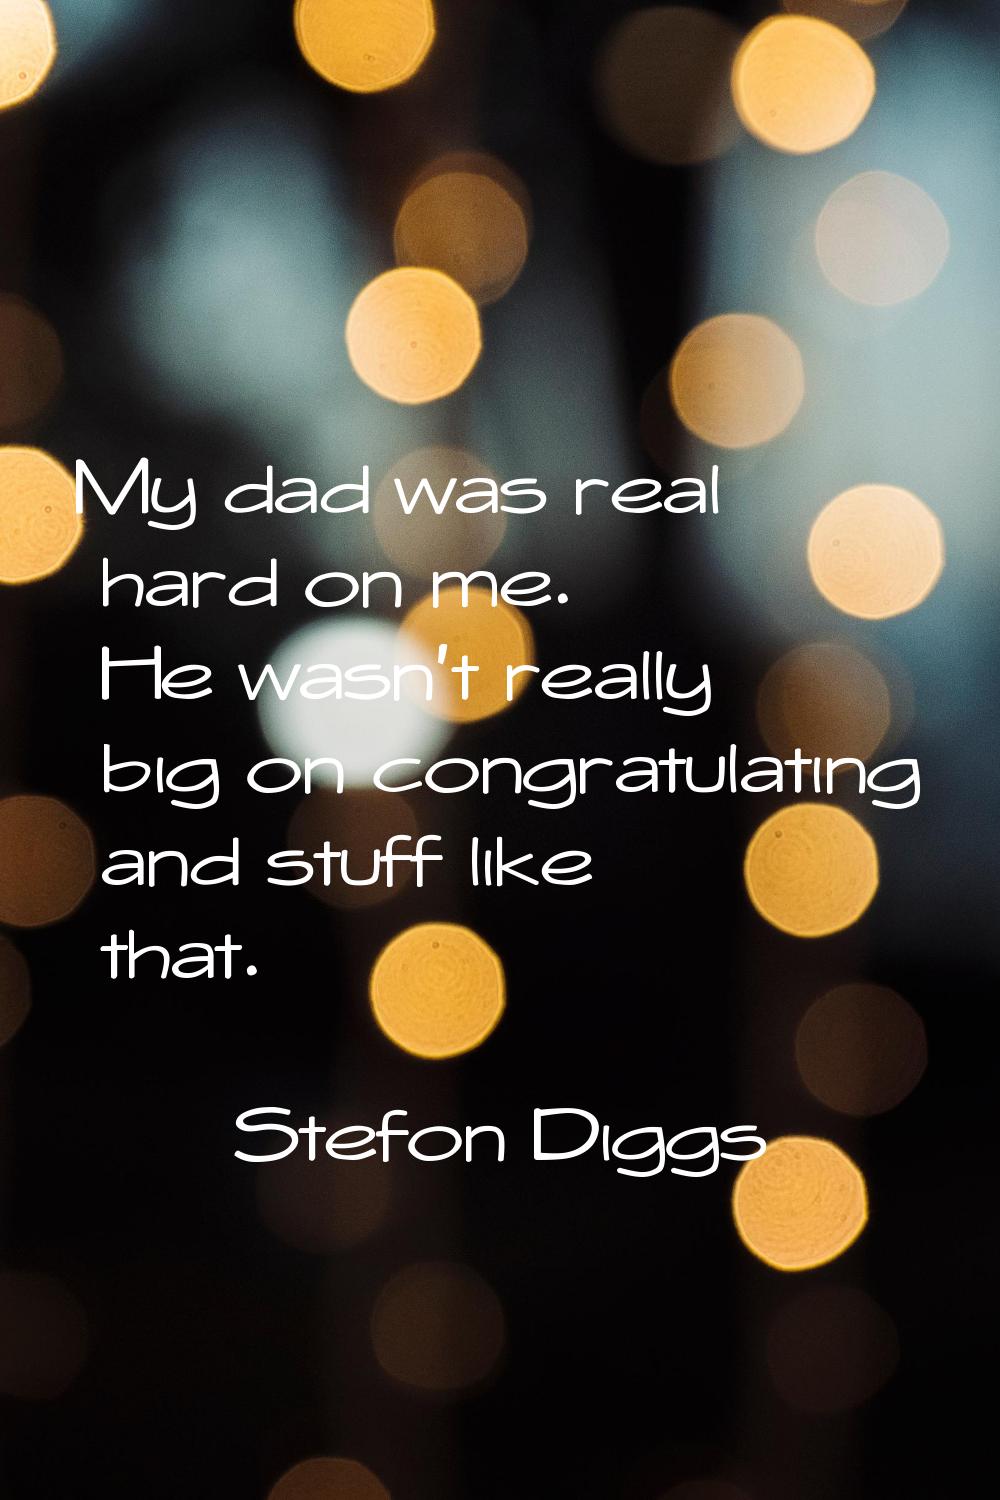 My dad was real hard on me. He wasn't really big on congratulating and stuff like that.